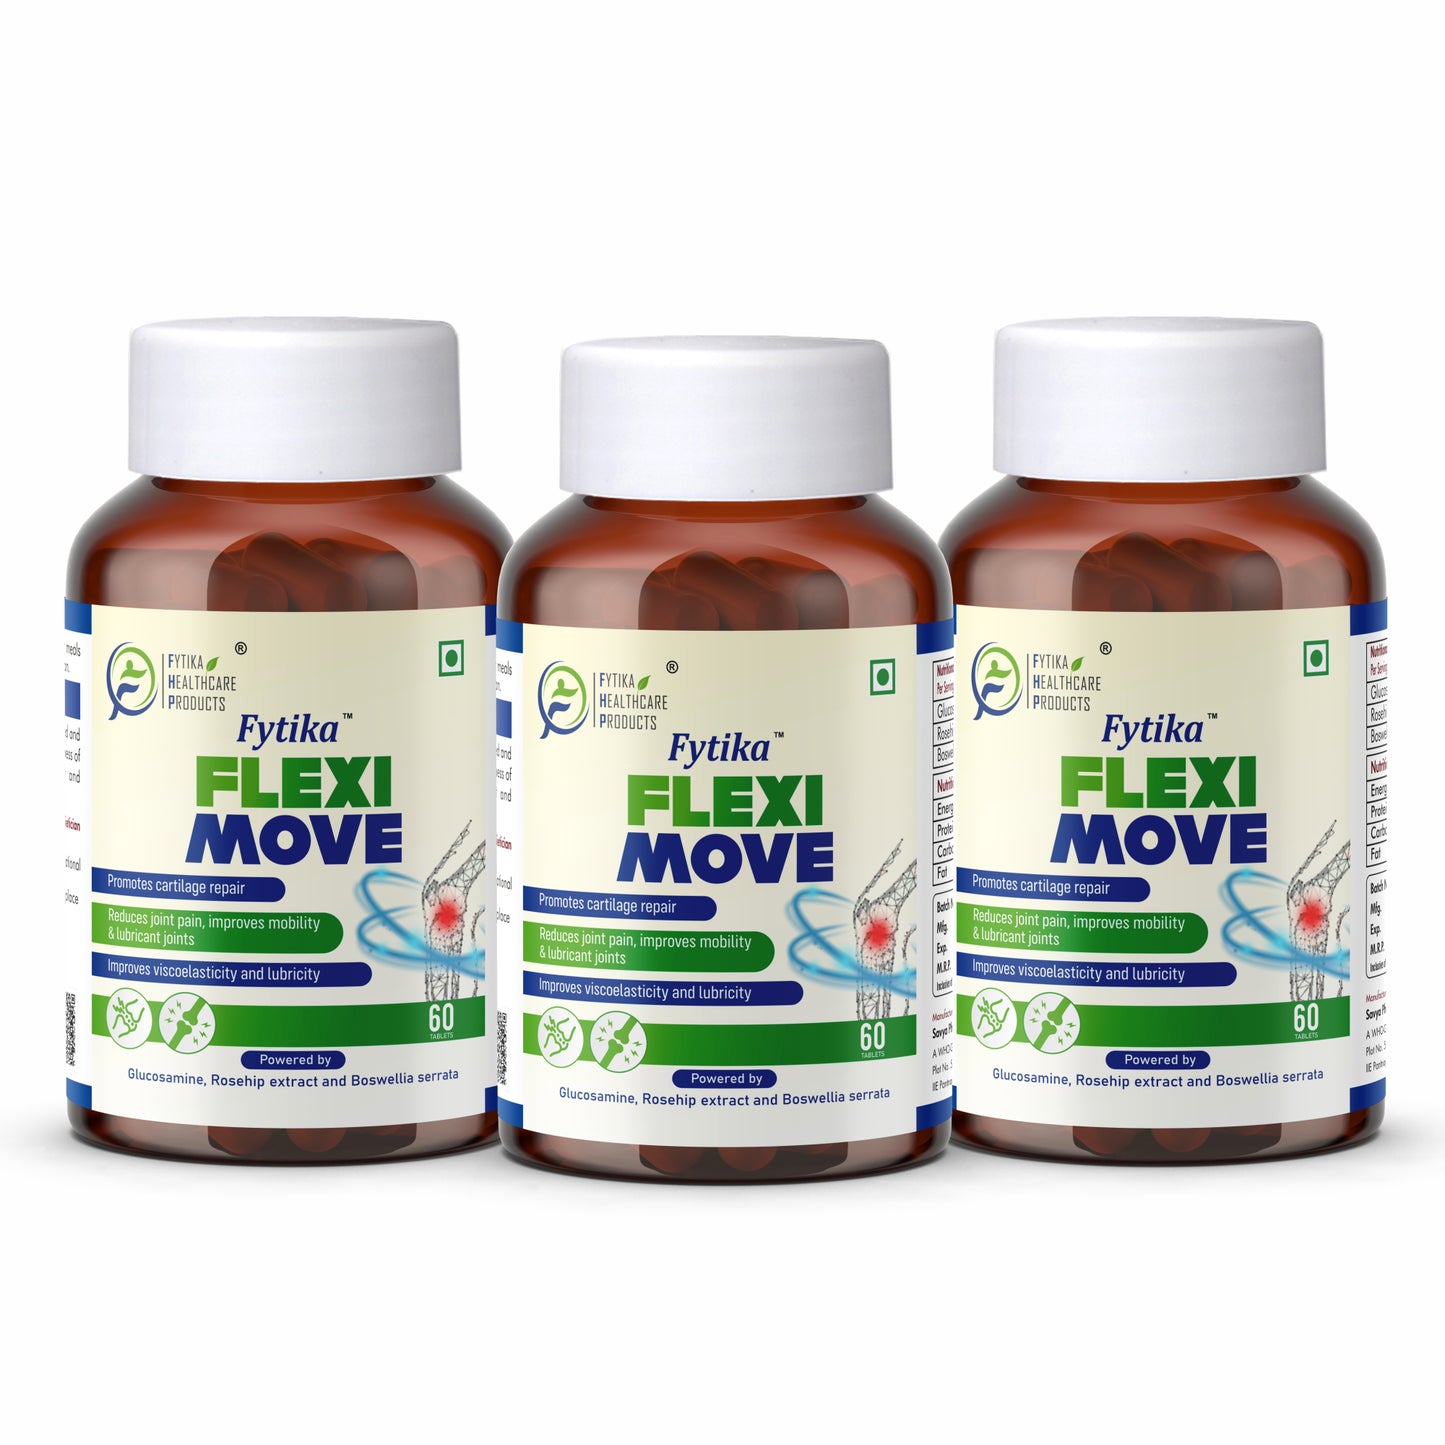 Fytika Flexi Move - Joint Support Supplement, Glucosamine, Rosehip, Boswellia Serrata, Supports Bone, Joint, Cartilage Health, For Men, Women -  Pack Of 3 (180 Tabs)